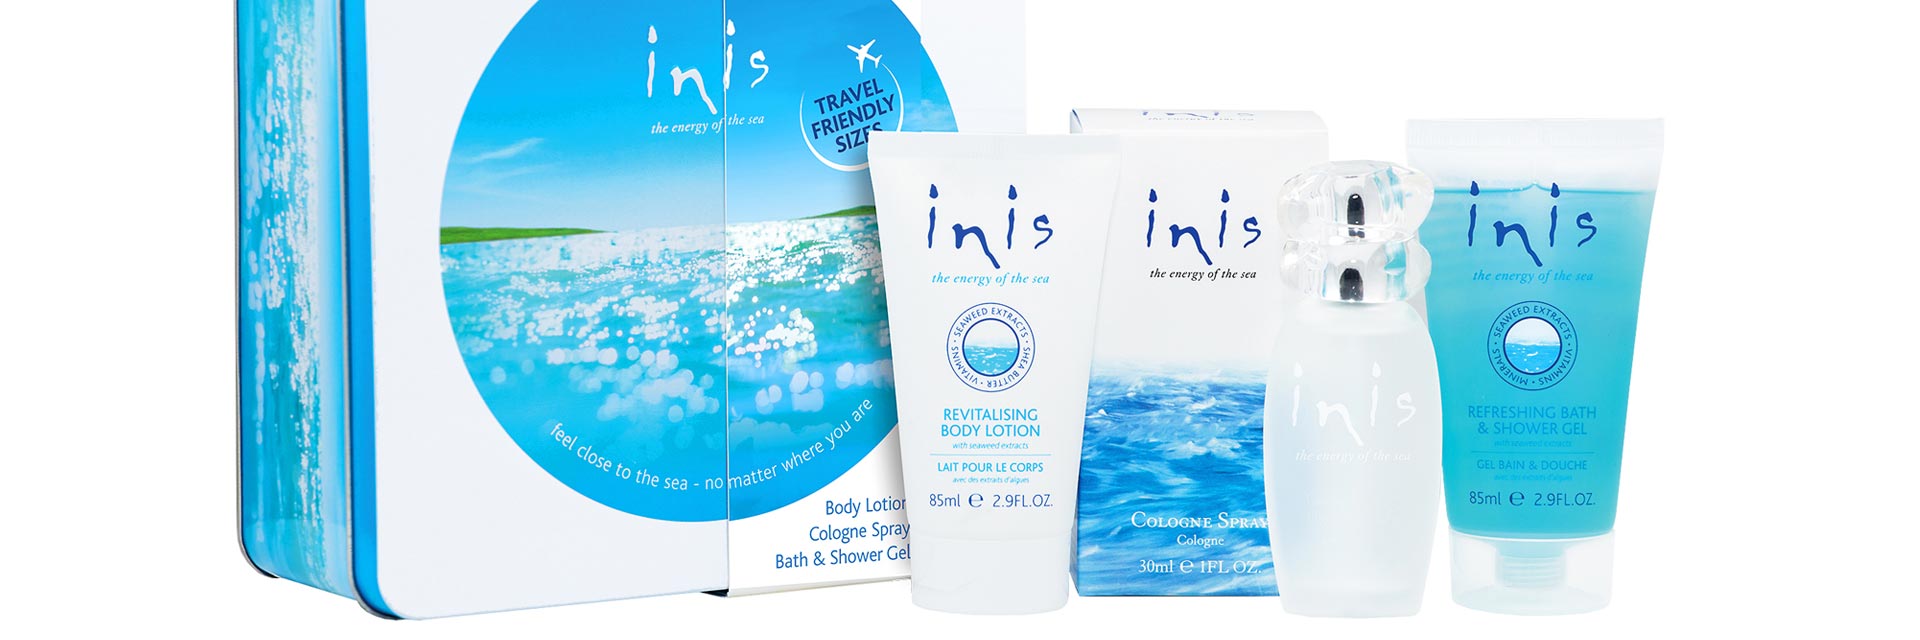 occasions2celebrate Inis Body lotion